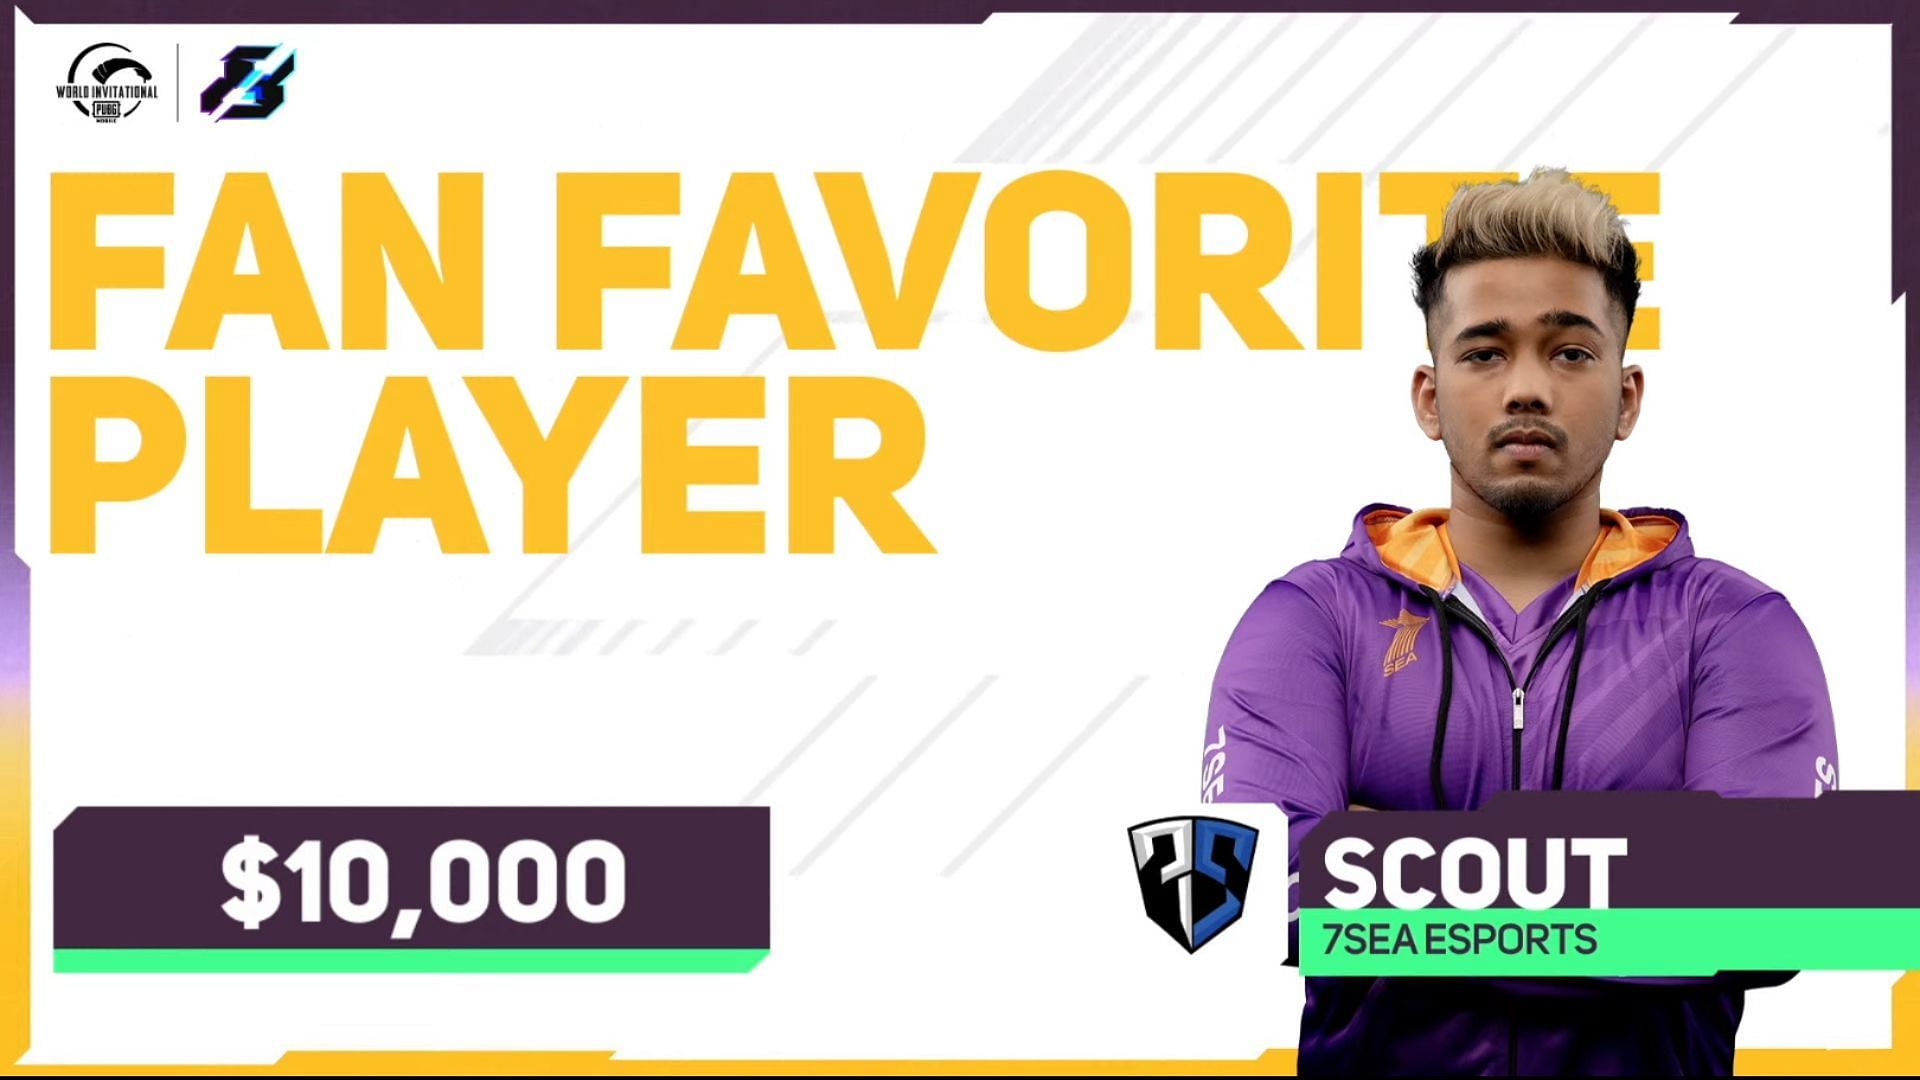 Scout became fan favorite player in PMWI Afterparty Showdown (Image via PUBG Mobile)